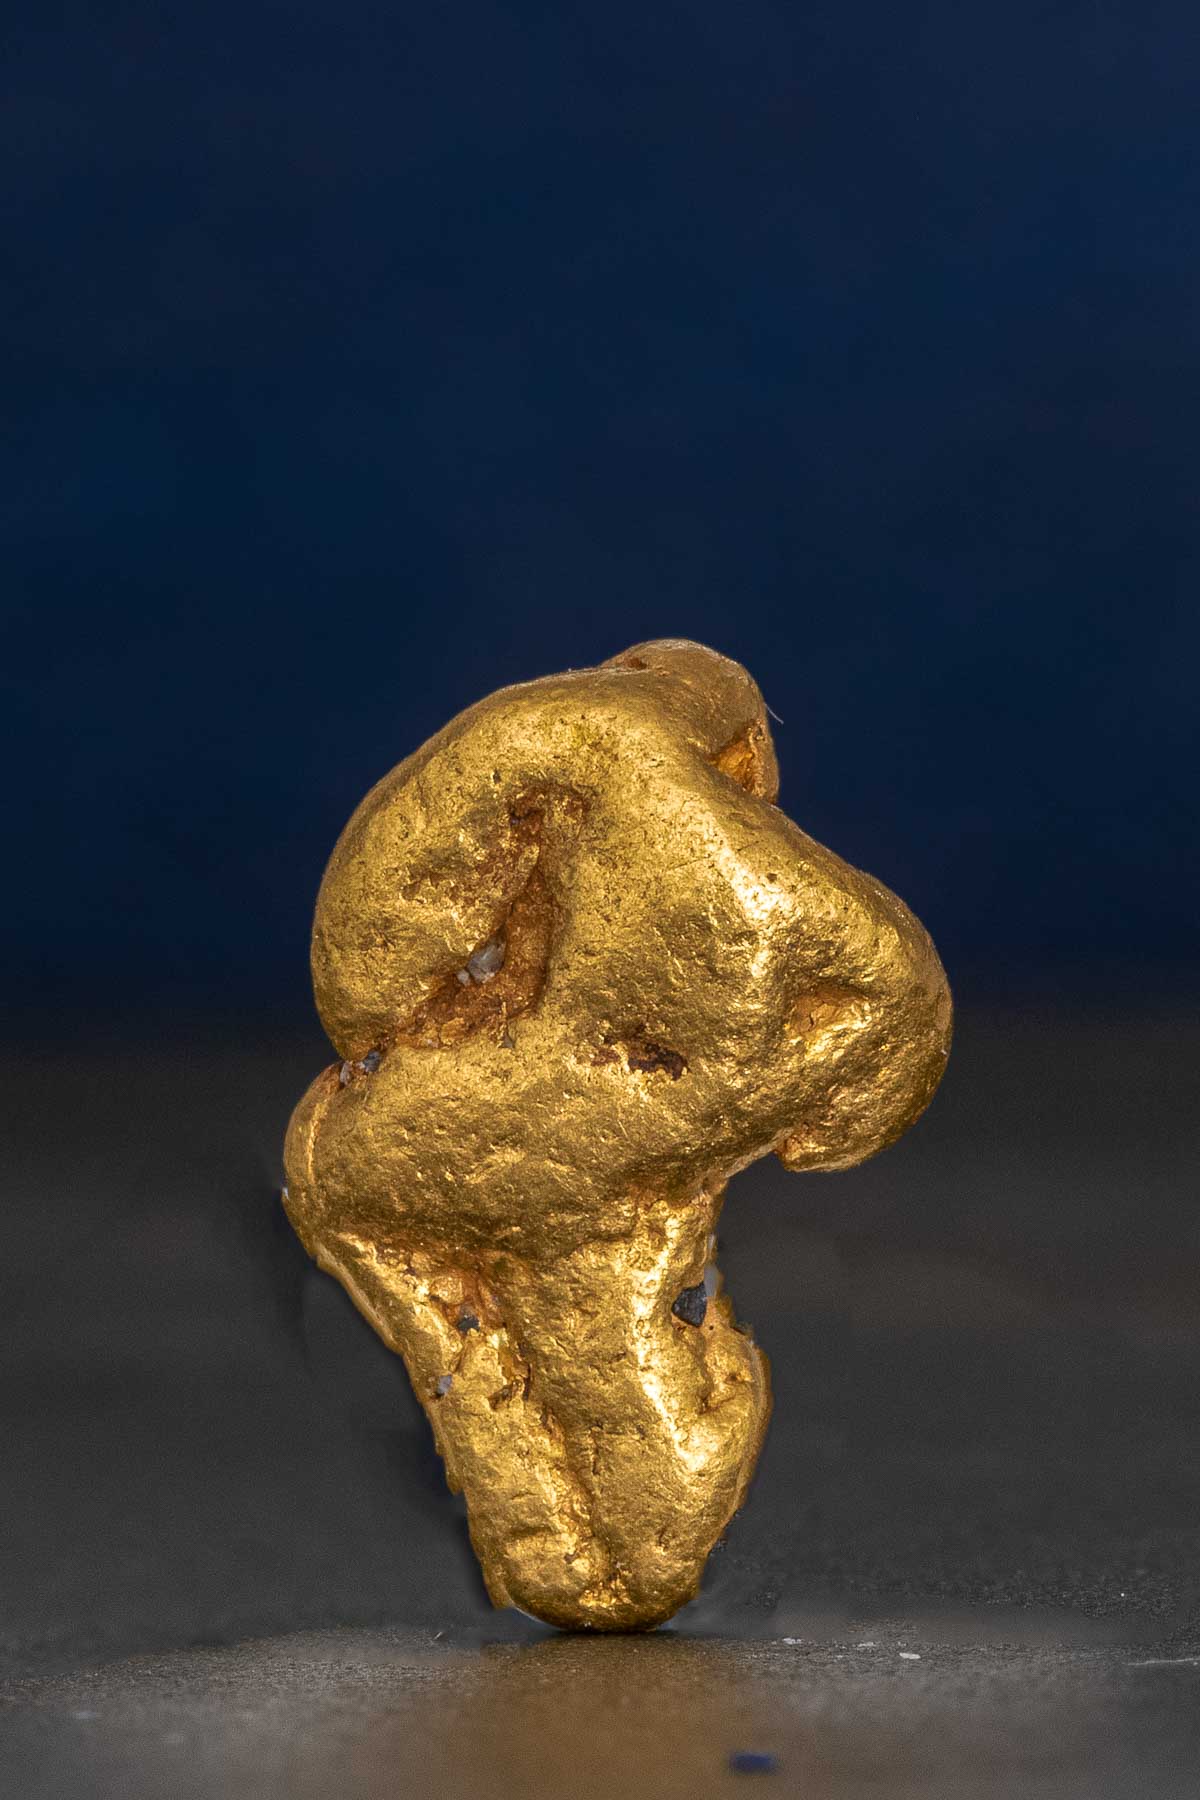 Natural California Gold Nugget with a Bend - 2.73 grams